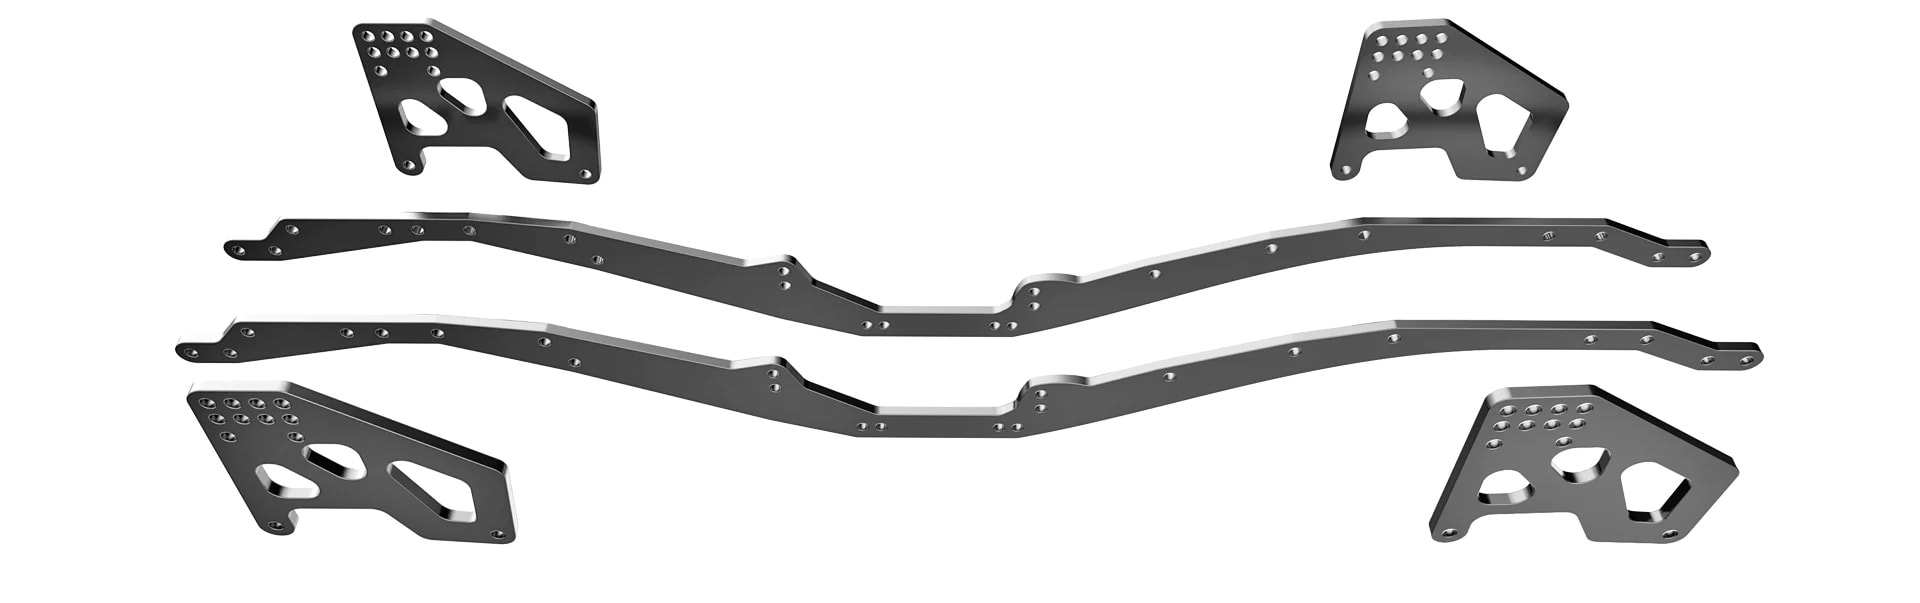 Redcat Ascent Chassis Frame Rails